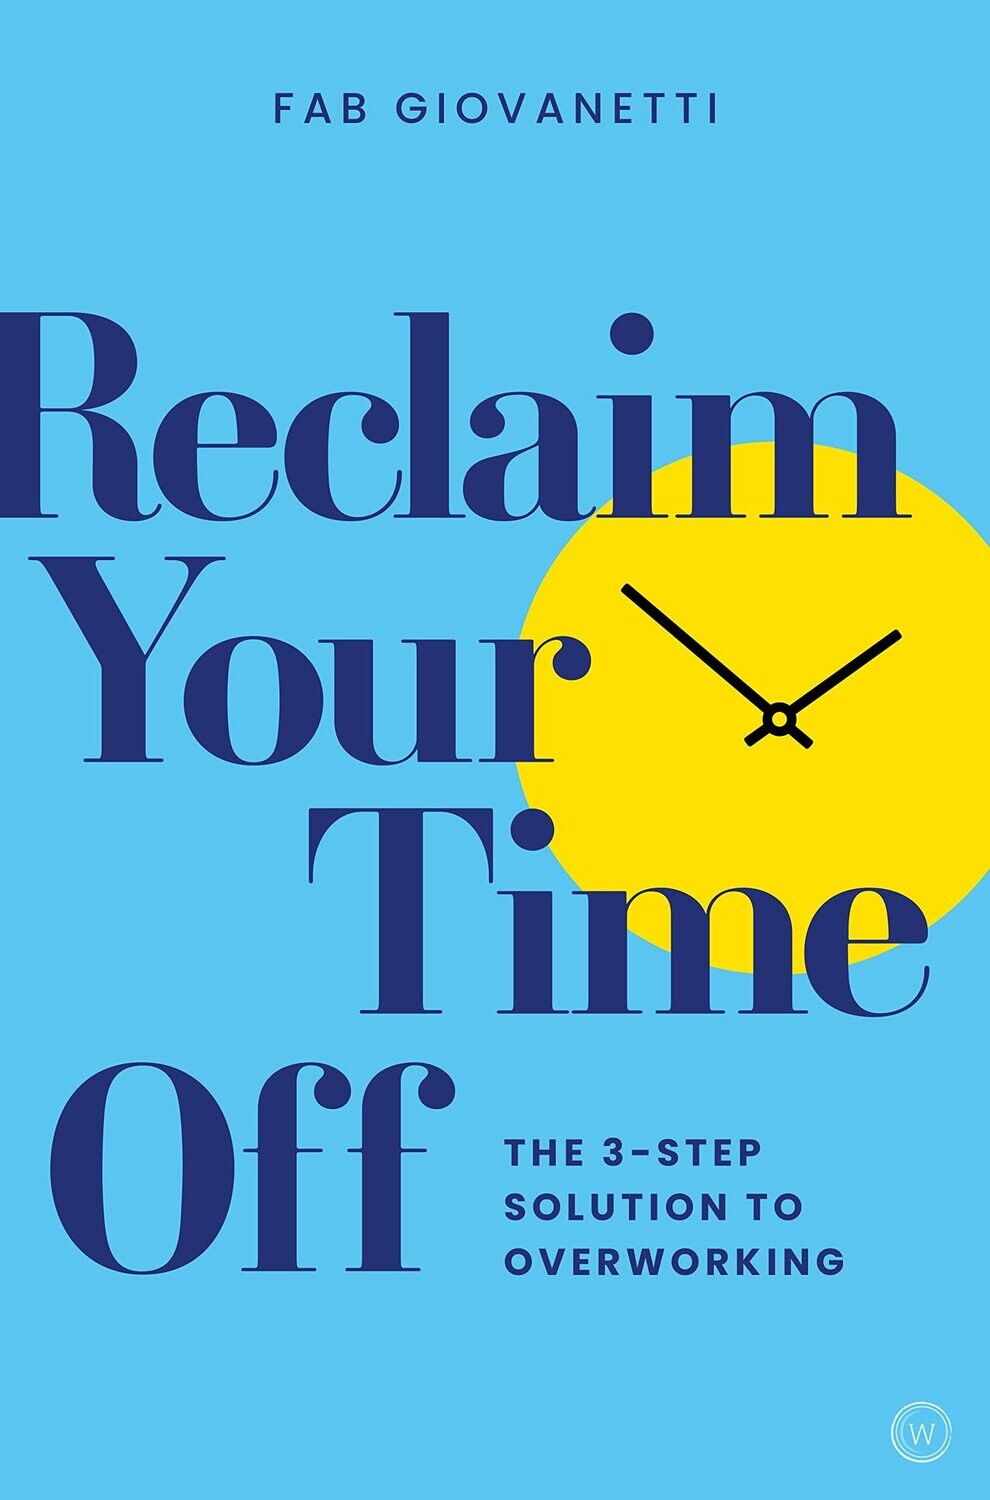 Reclaim Your Time Off: The Three-Step Solution to Overworking: The 3-step Solution to Overworking